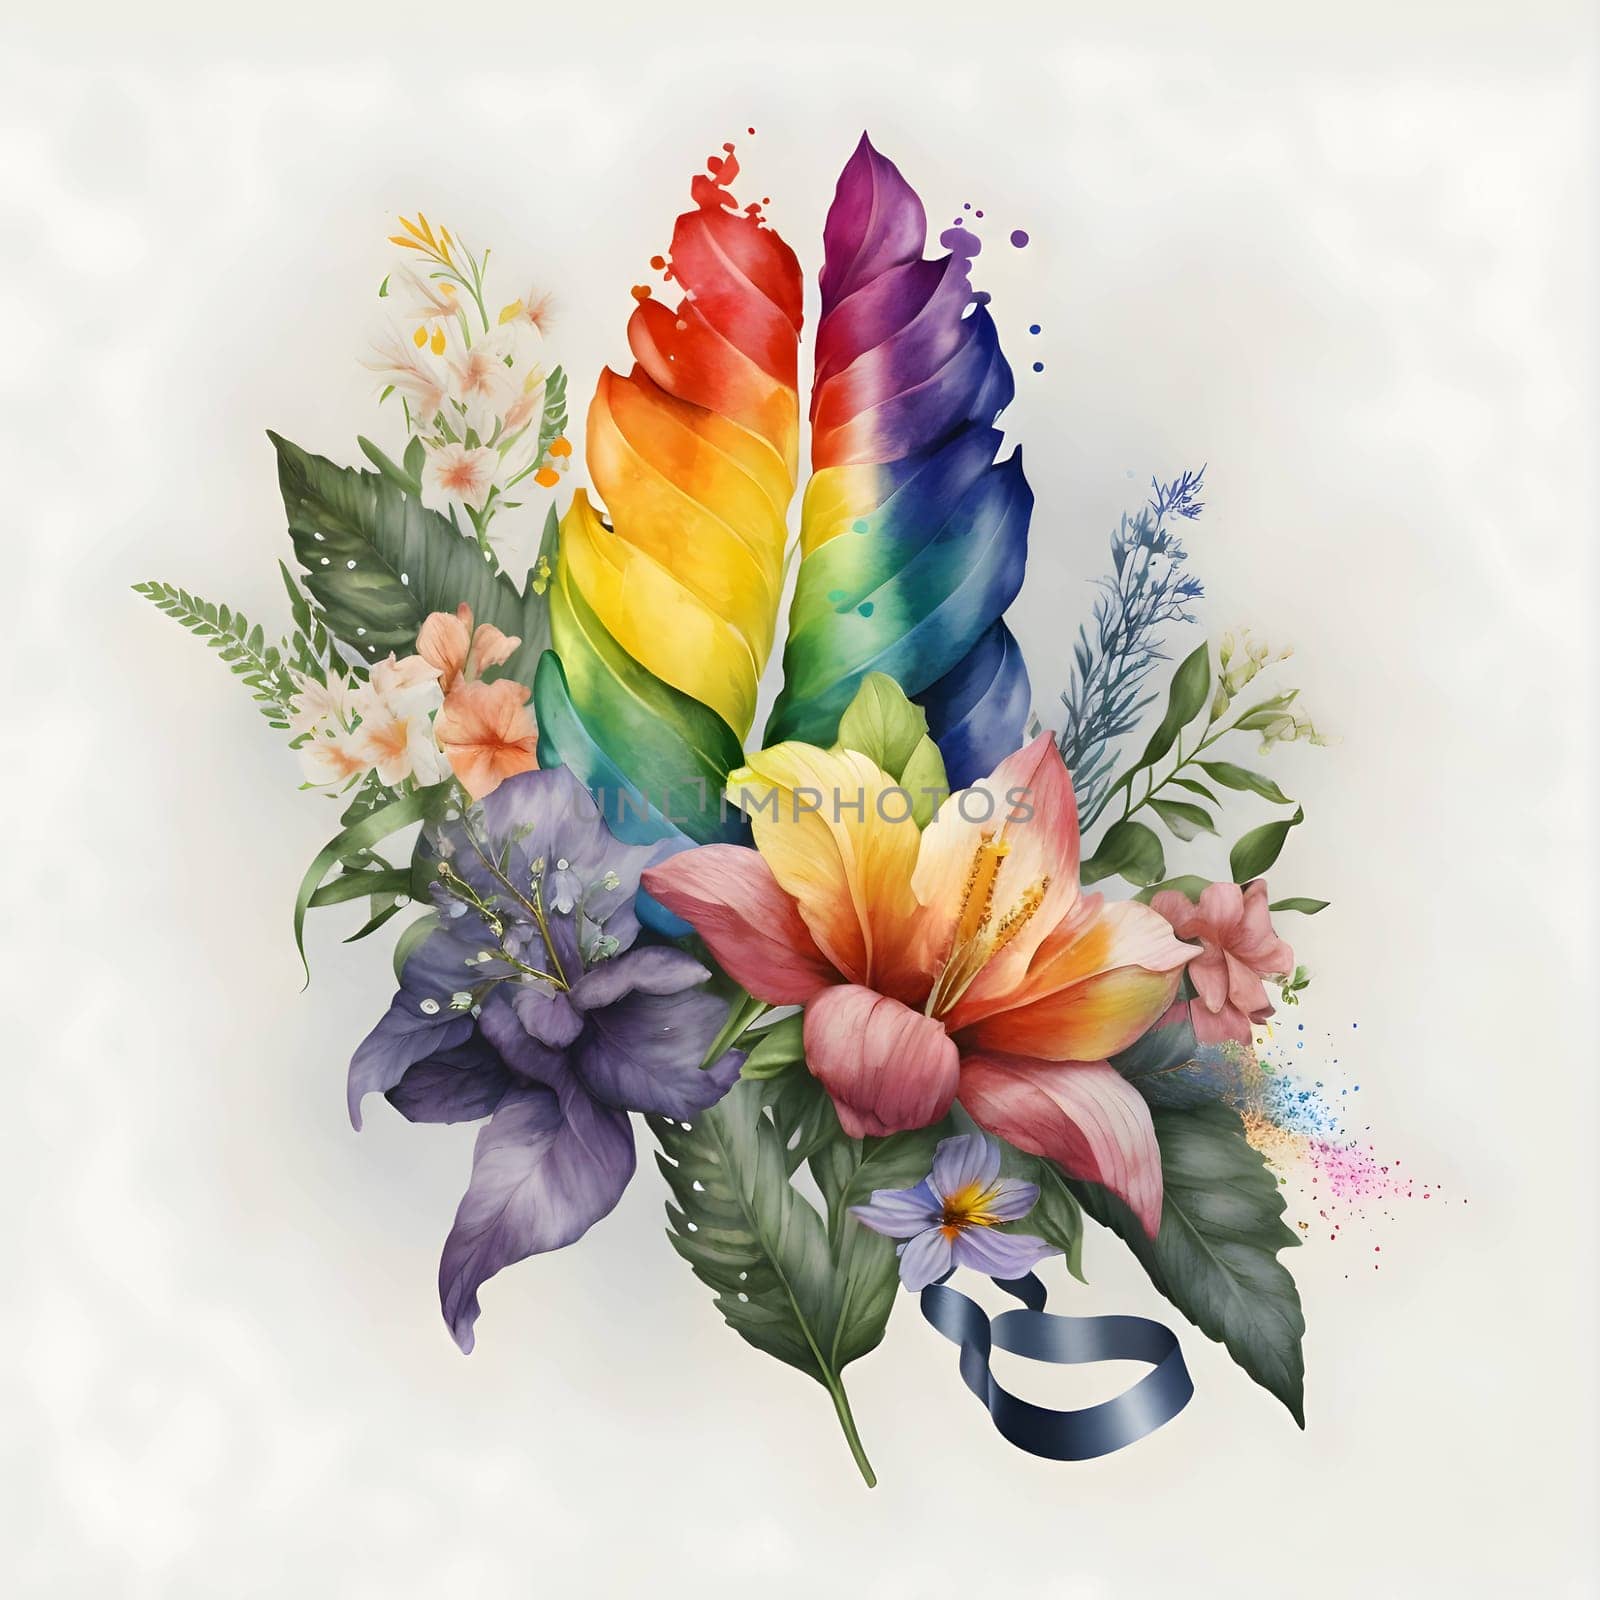 Illustration of vibrant flowers, each blooming in a different shade of the rainbow, beautifully arranged on a clean white background.